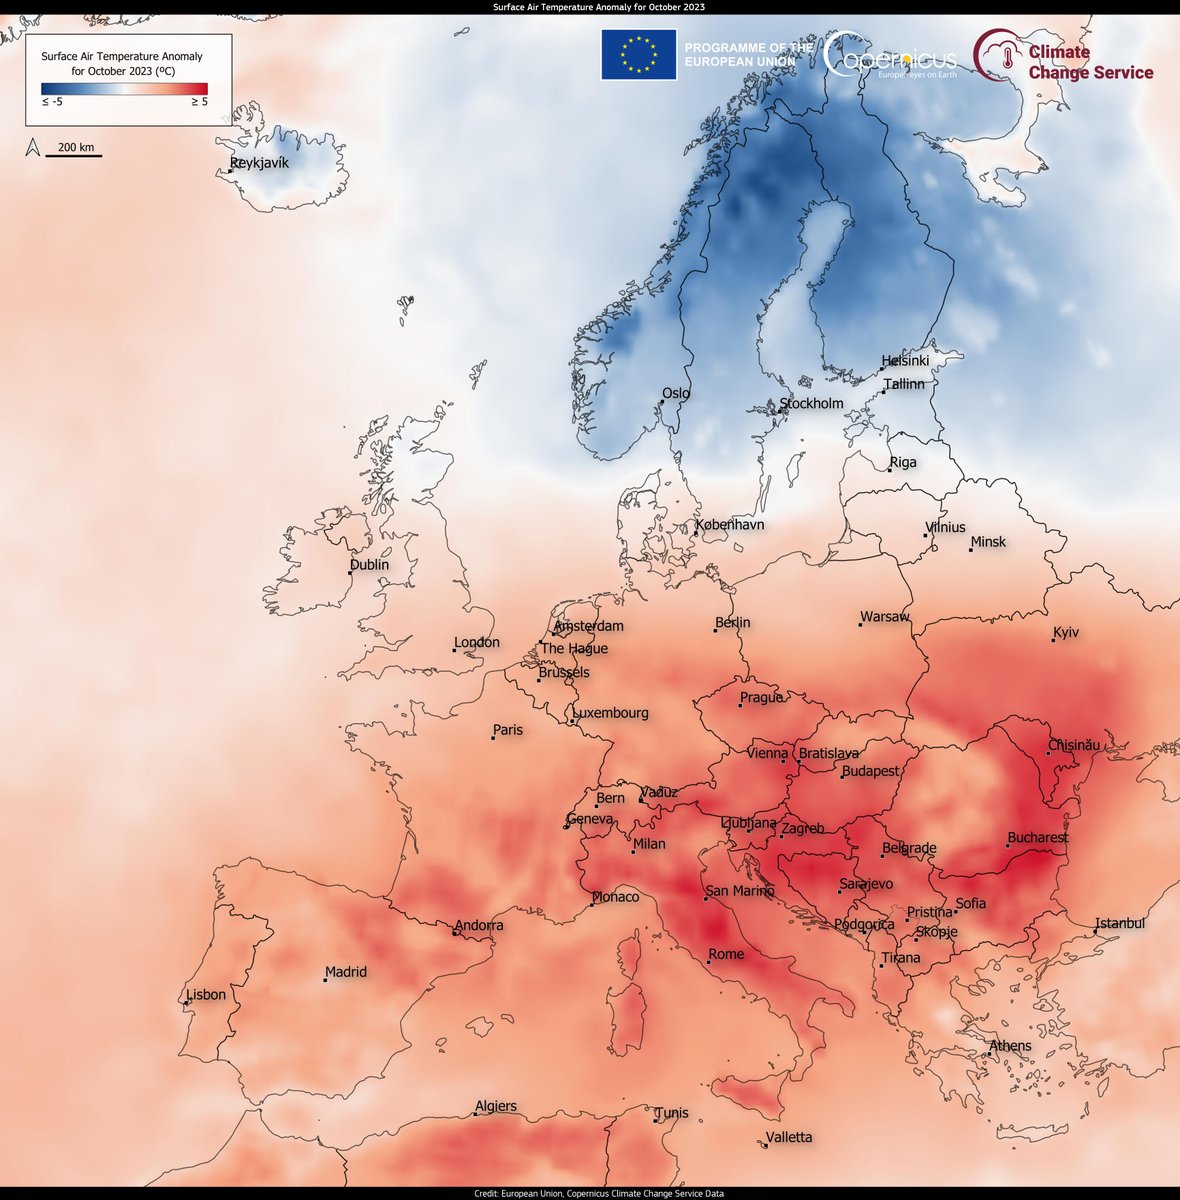 Climate-related financial risks are a major challenge. Our scientists support @EUEnvironment in mapping out the climate risks that Europe will need to manage in the next 10 years, including the many different economic and social risks. Read the news: europa.eu/!pfhDVy